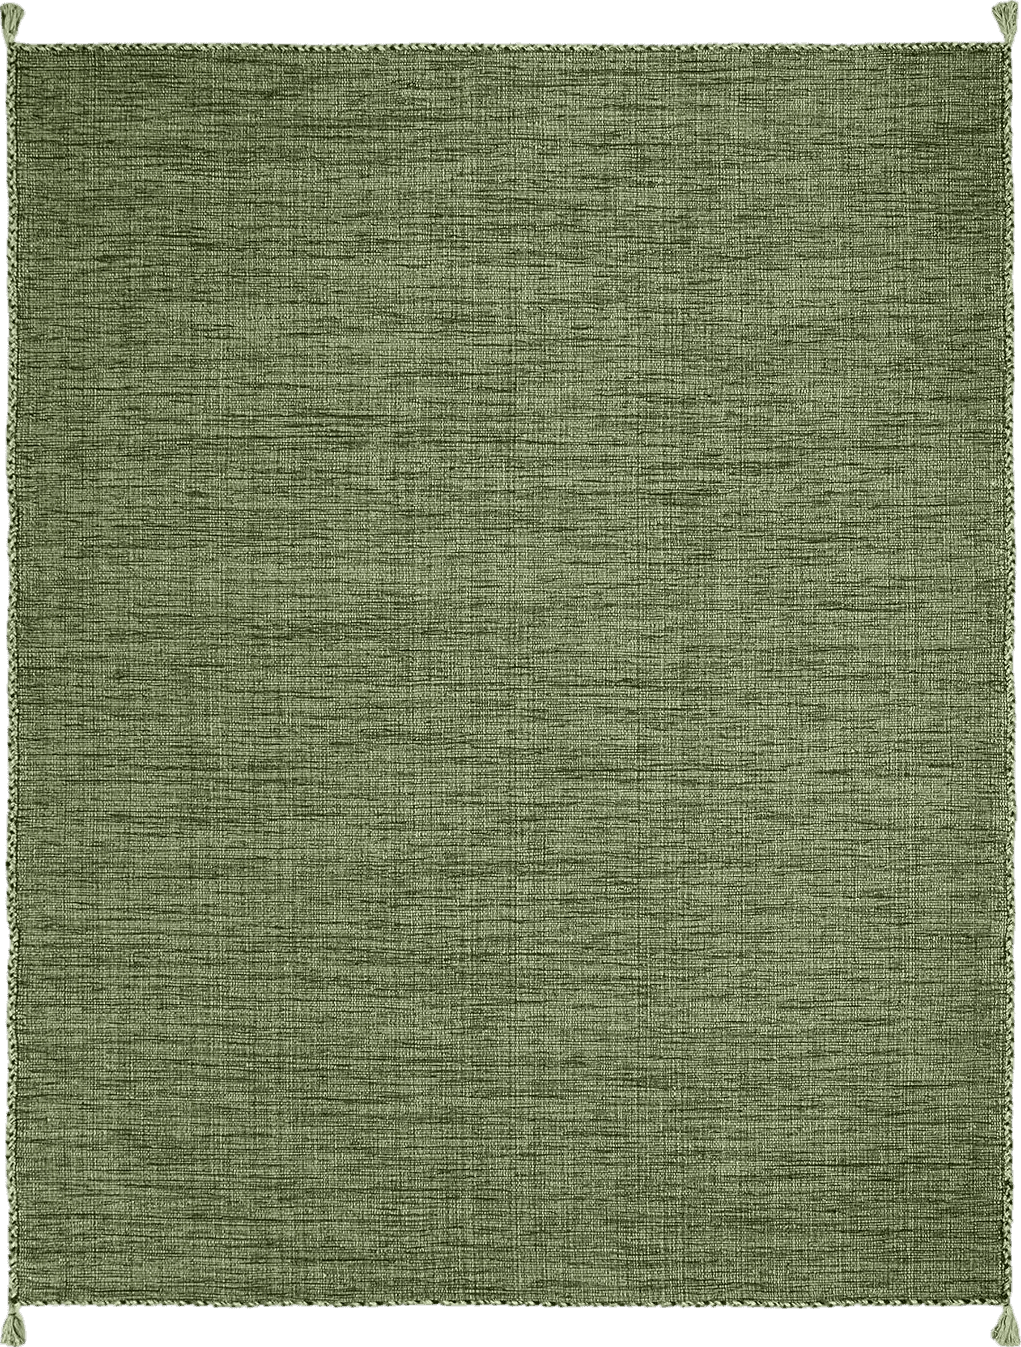 All Runners Doorway (small rugs) 2x3 3x5 4x6 SAFAVIEH Montauk Collection Area Rug - 9' x 12', Green & Black, Handmade Flat Weave Cotton Corner Tassel, Ideal for High Traffic Areas in Living Room, Bedroom (MTK150Y)